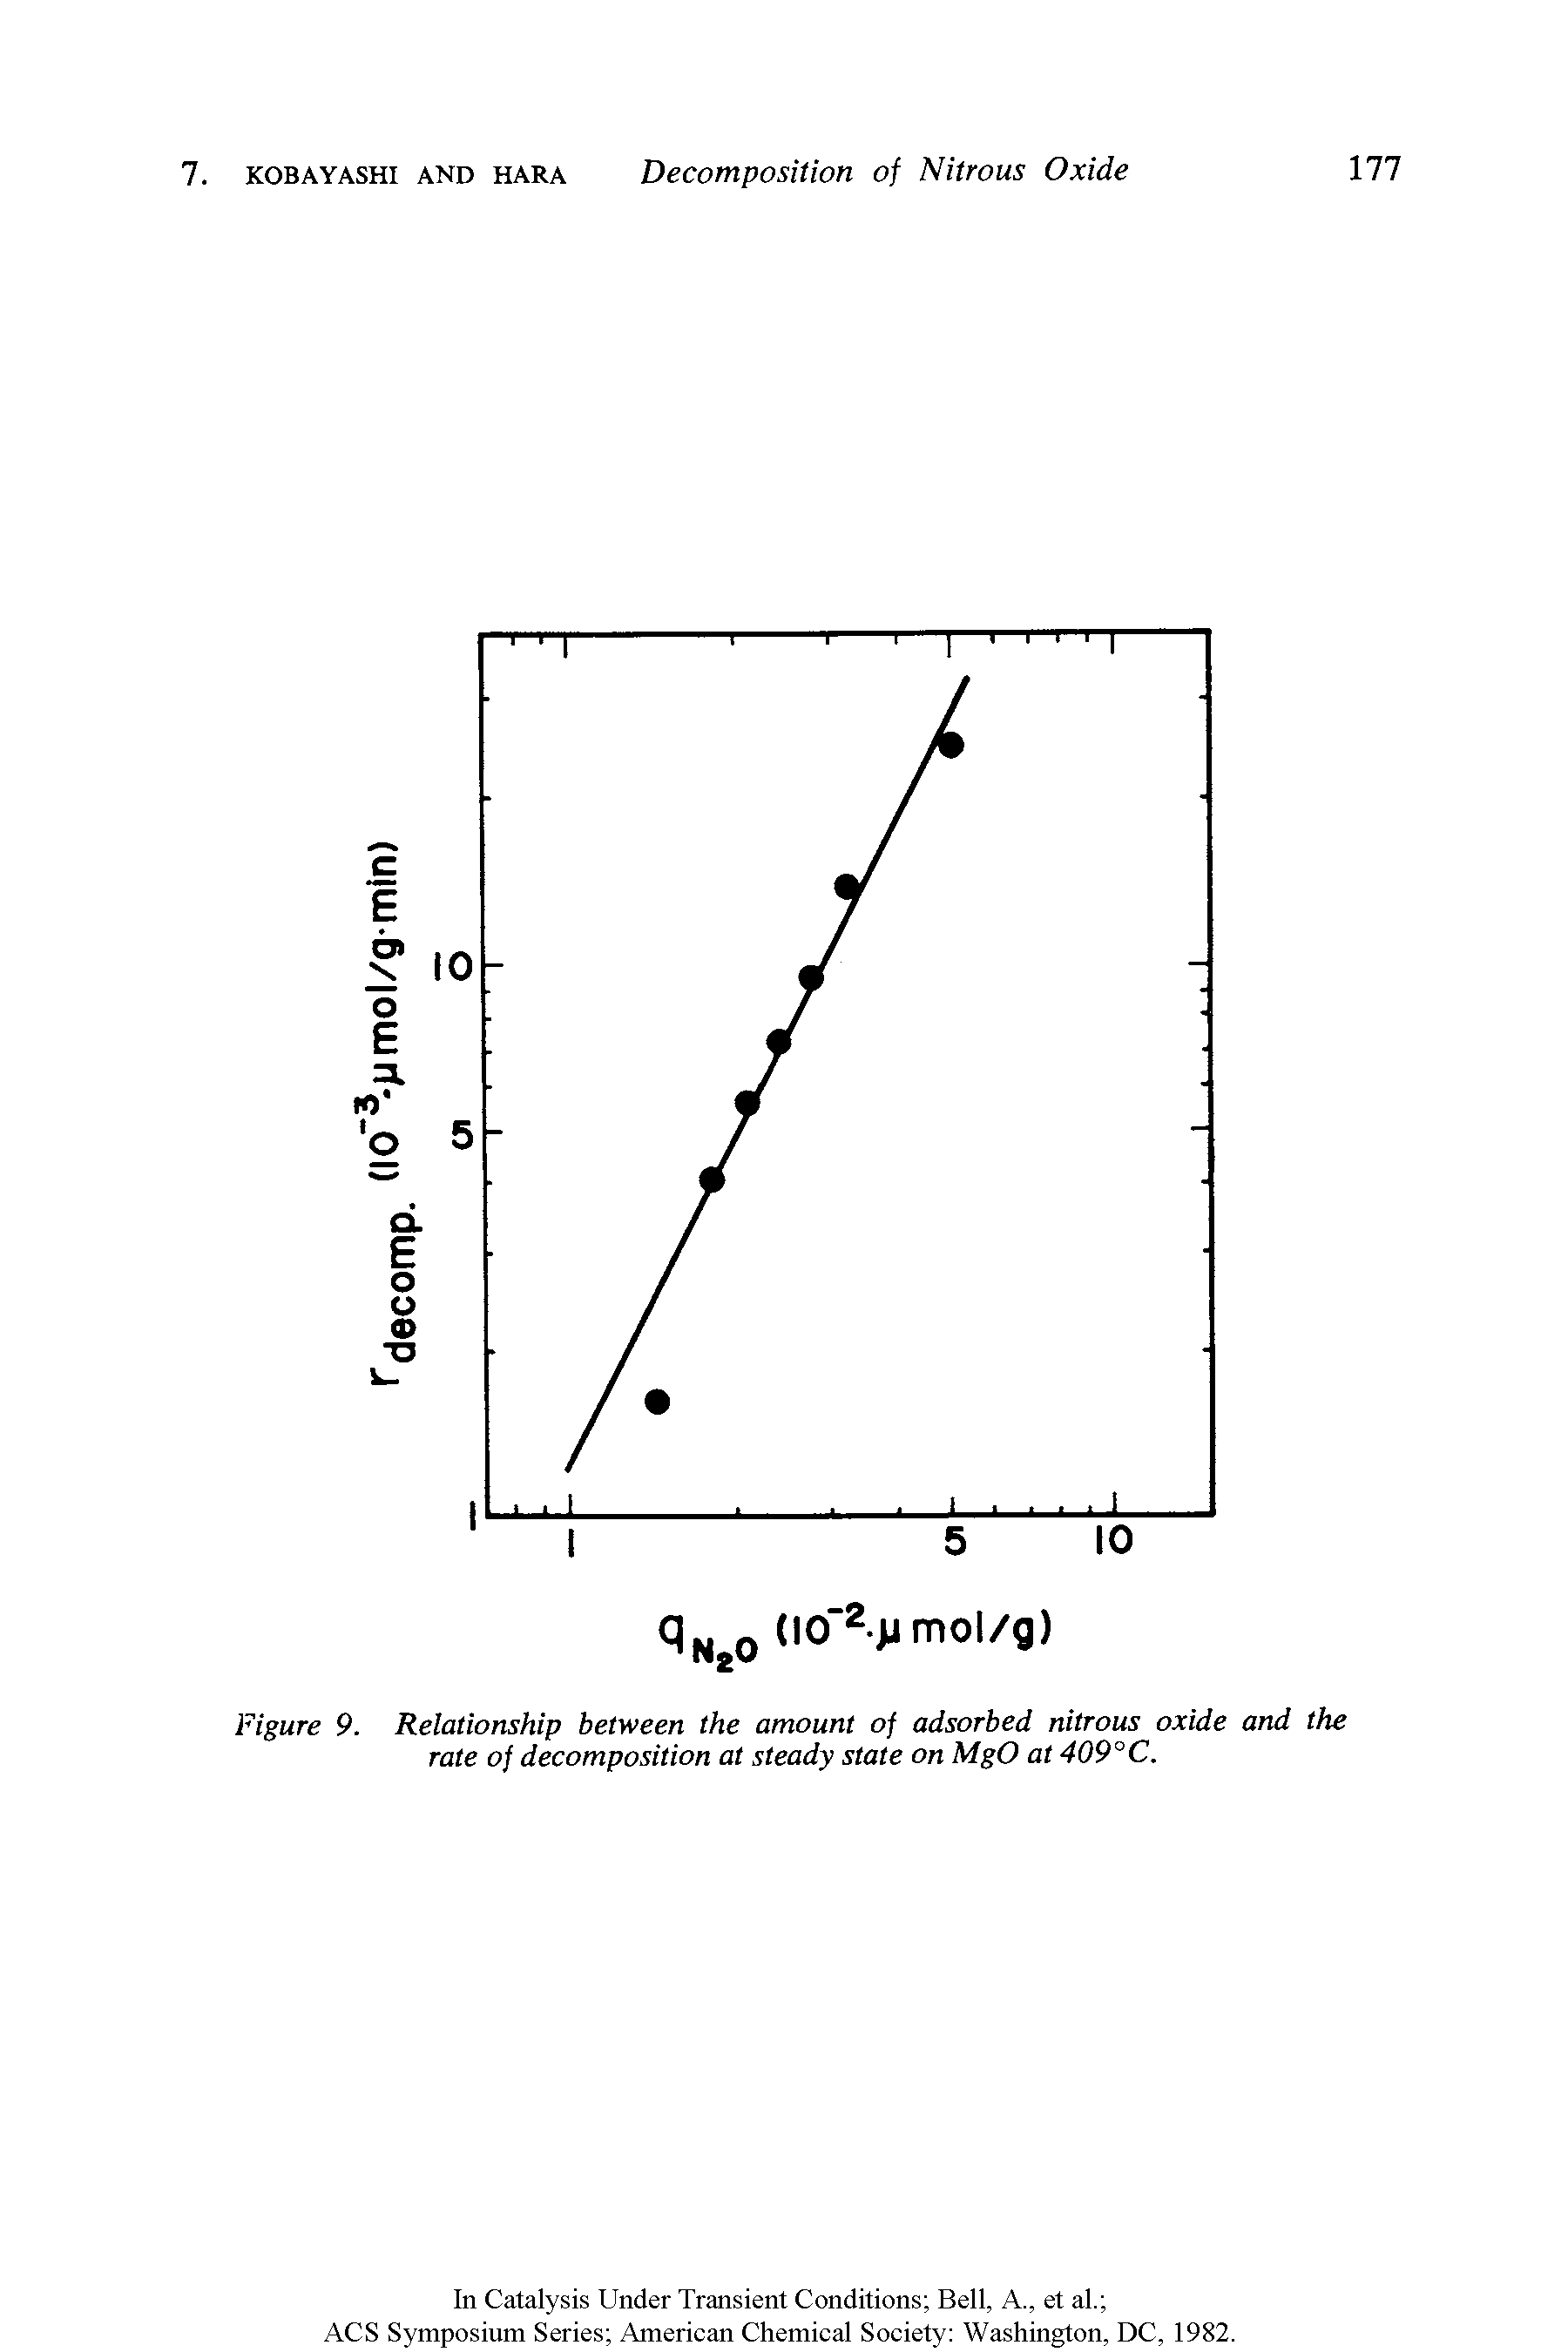 Figure 9. Relationship between the amount of adsorbed nitrous oxide and the rate of decomposition at steady state on MgO at 409°C.